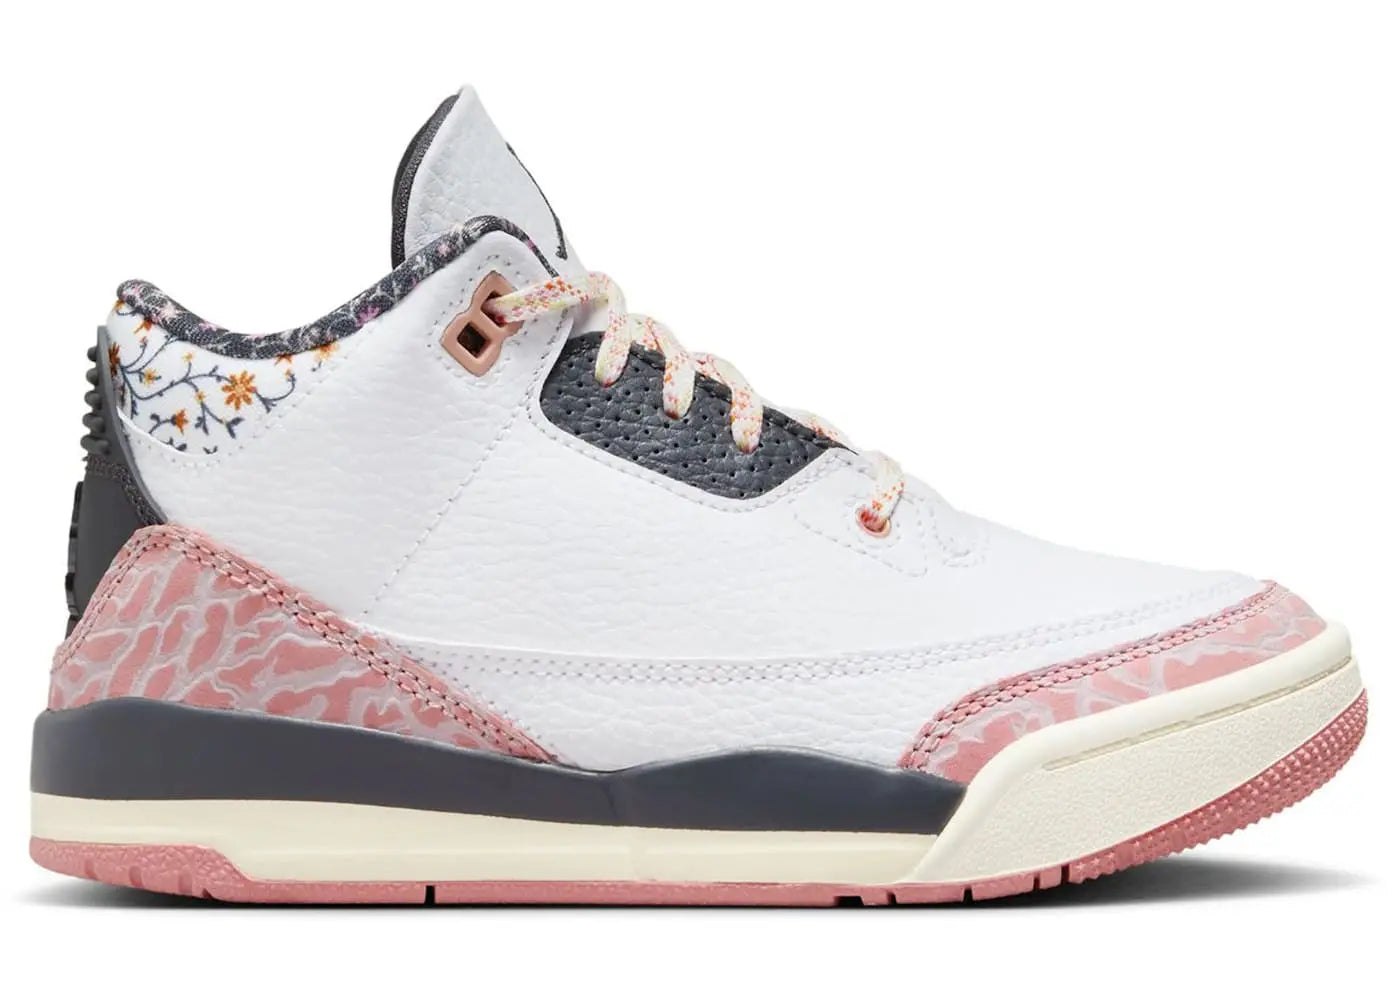 Jordan 3 Retro Red Stardust (PS) in Auckland, New Zealand - Shop name